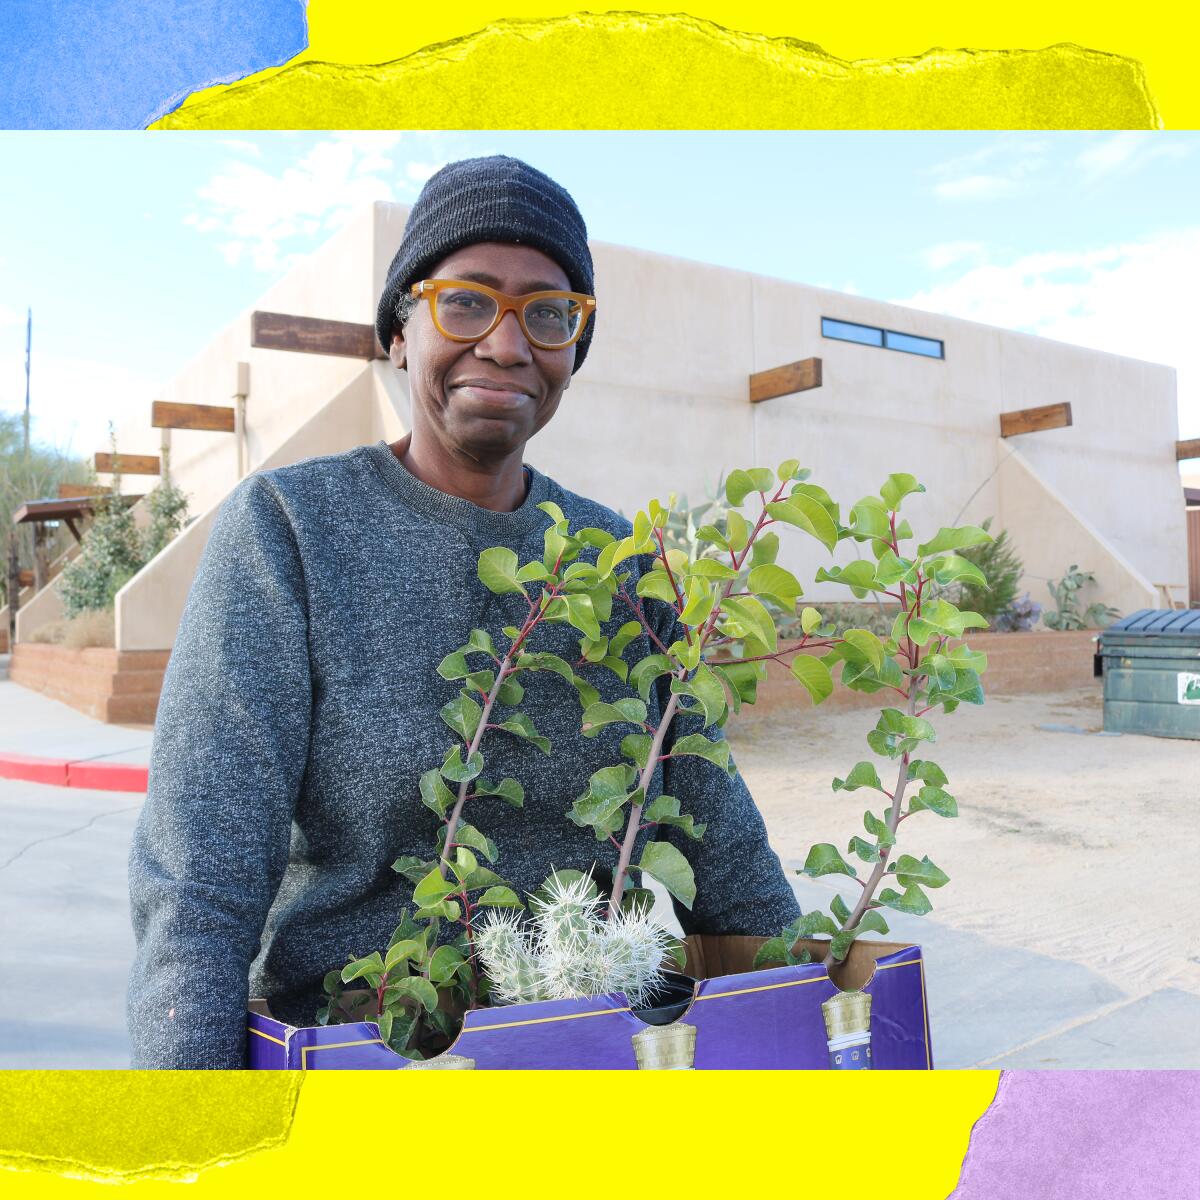 A person in gray sweatshirt, gray beanie and glasses smiles while holding a tray of plants in pots.